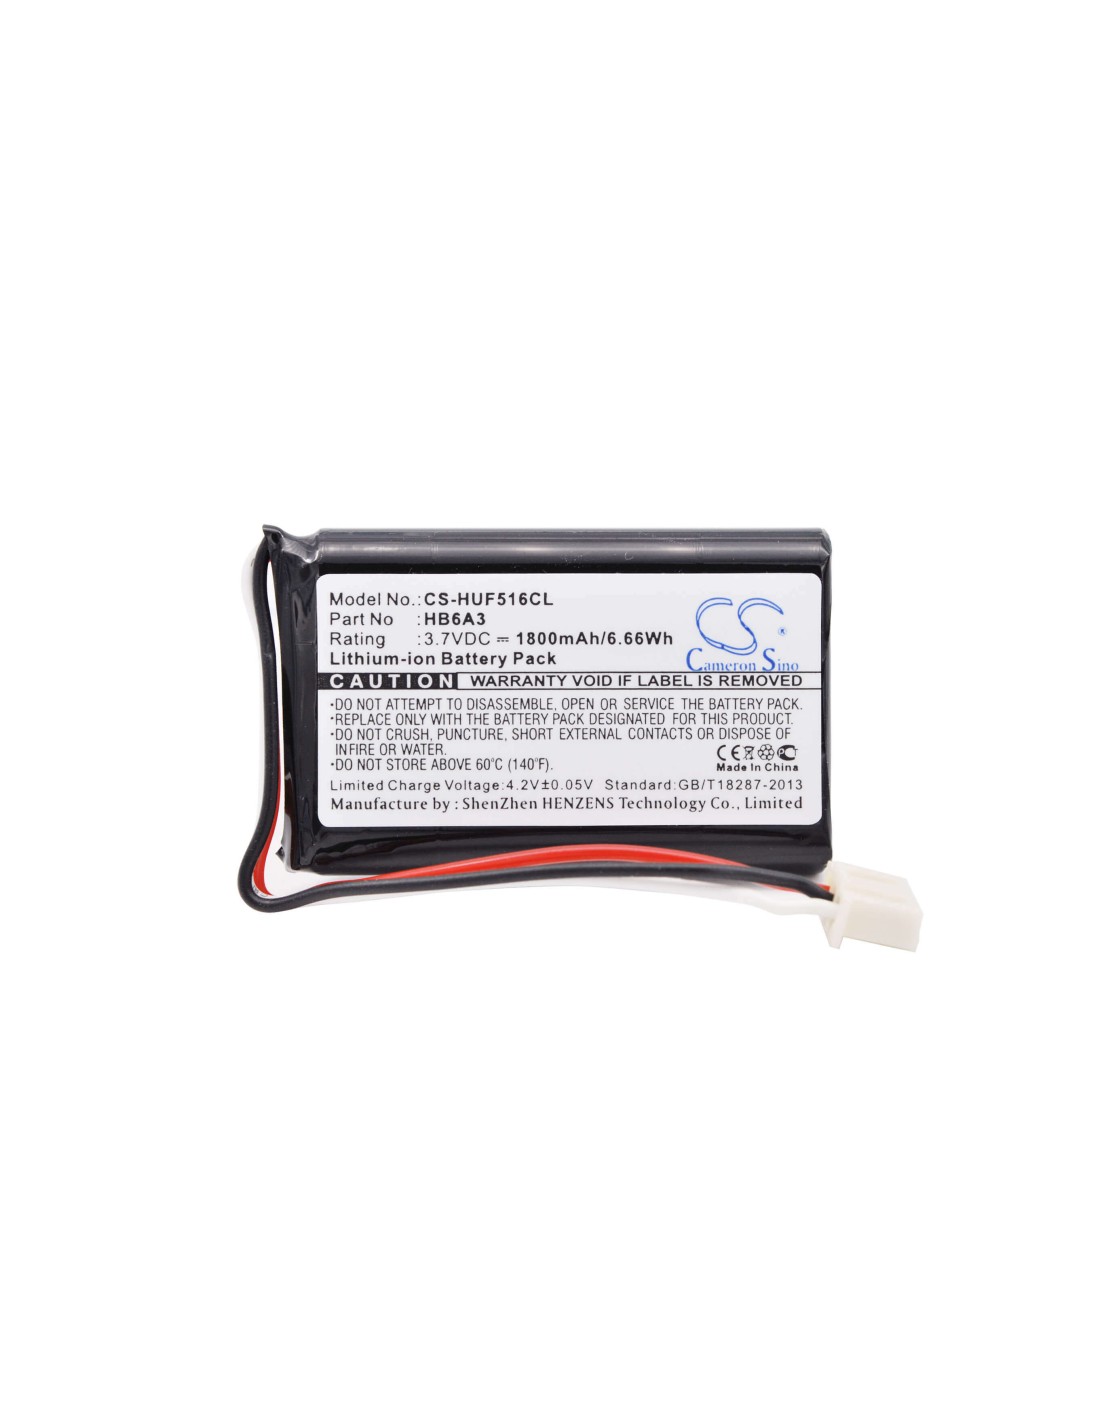 Battery for Huawei, Ets5623, F501, F516, F530, 3.7V, 1800mAh - 6.66Wh